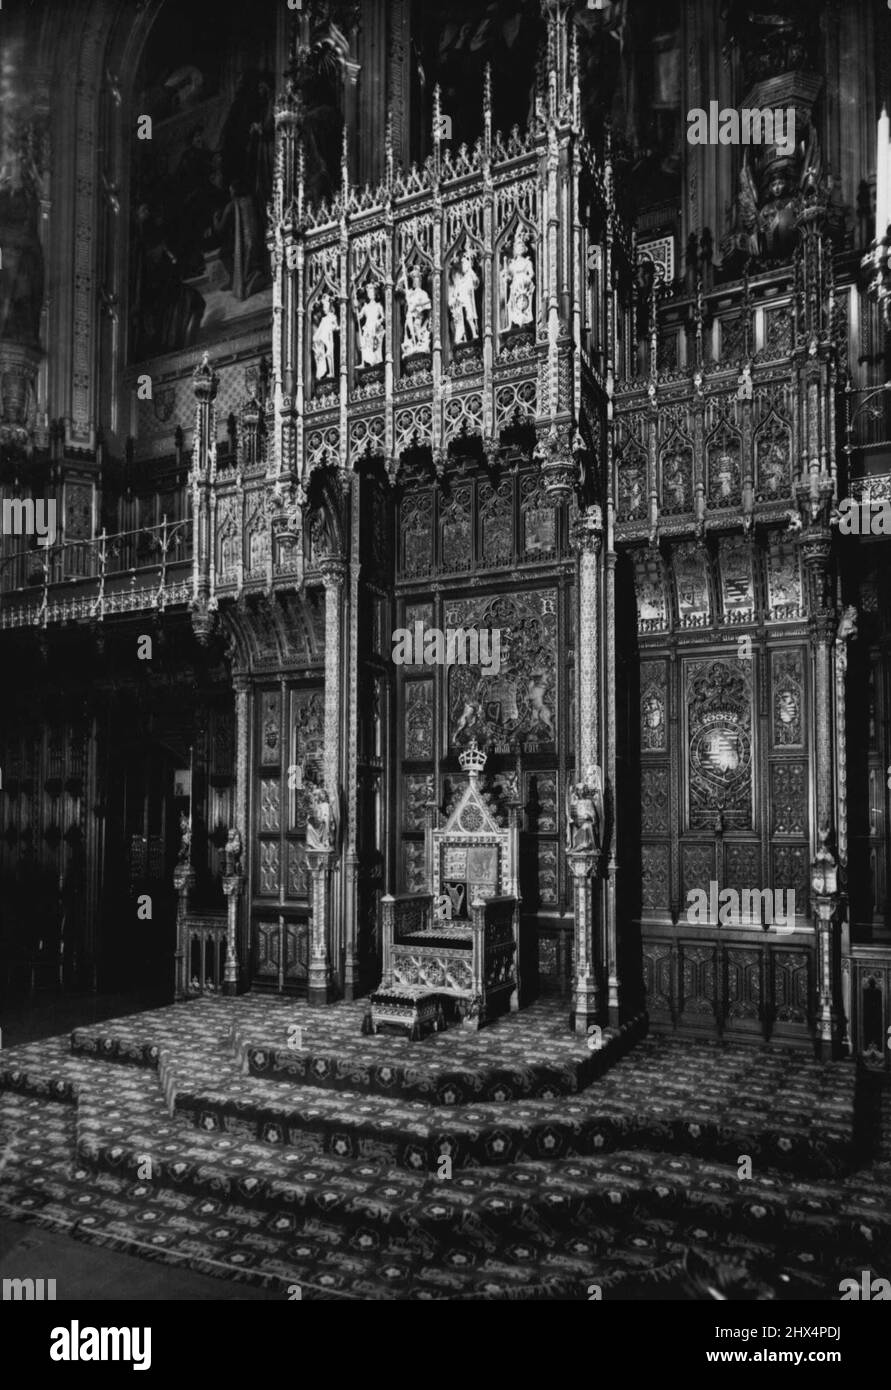 Ready For State Opening of Parliament - The ornate throne in the House of Lords from which the Queen Hill deliver her speech at the State Opening of Parliament on Tuesday November 4th. October 31, 1952. Stock Photo